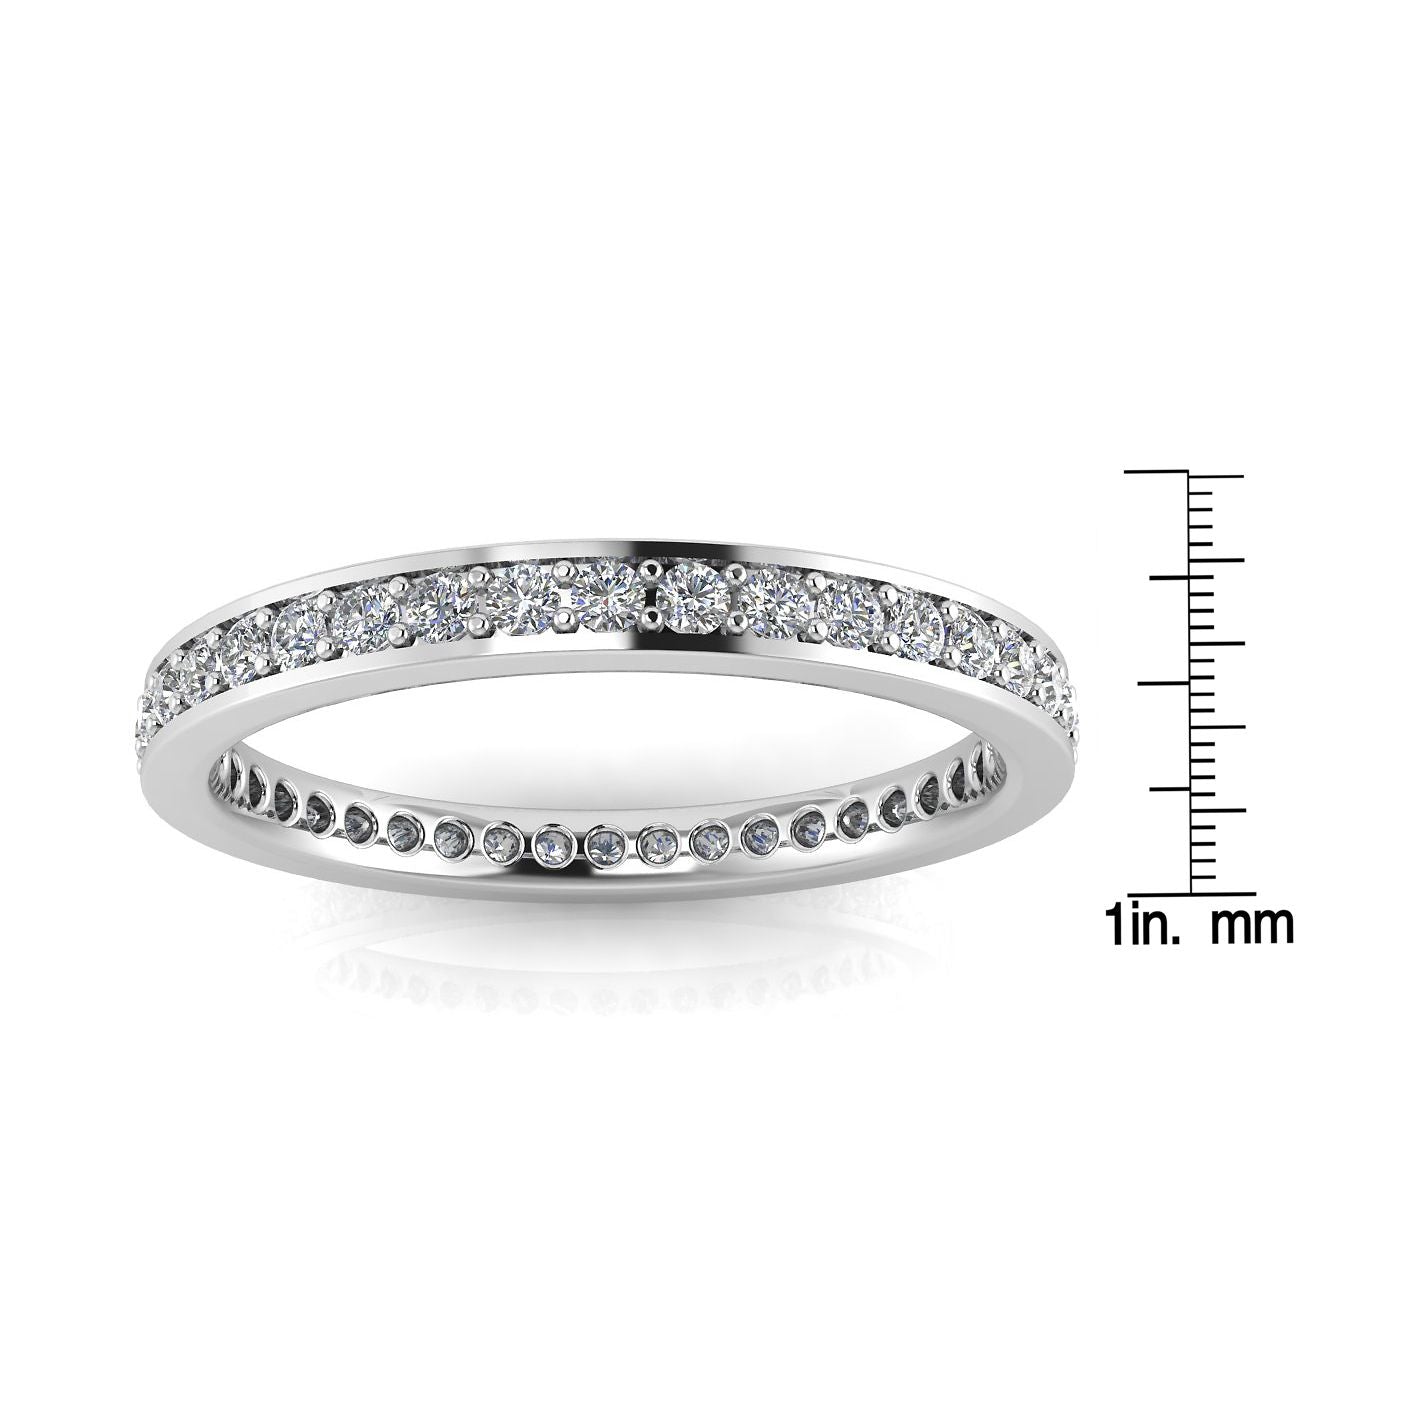 Round Brilliant Cut Diamond Channel Pave Set Eternity Ring In 18k White Gold  (0.92ct. Tw.) Ring Size 5.5